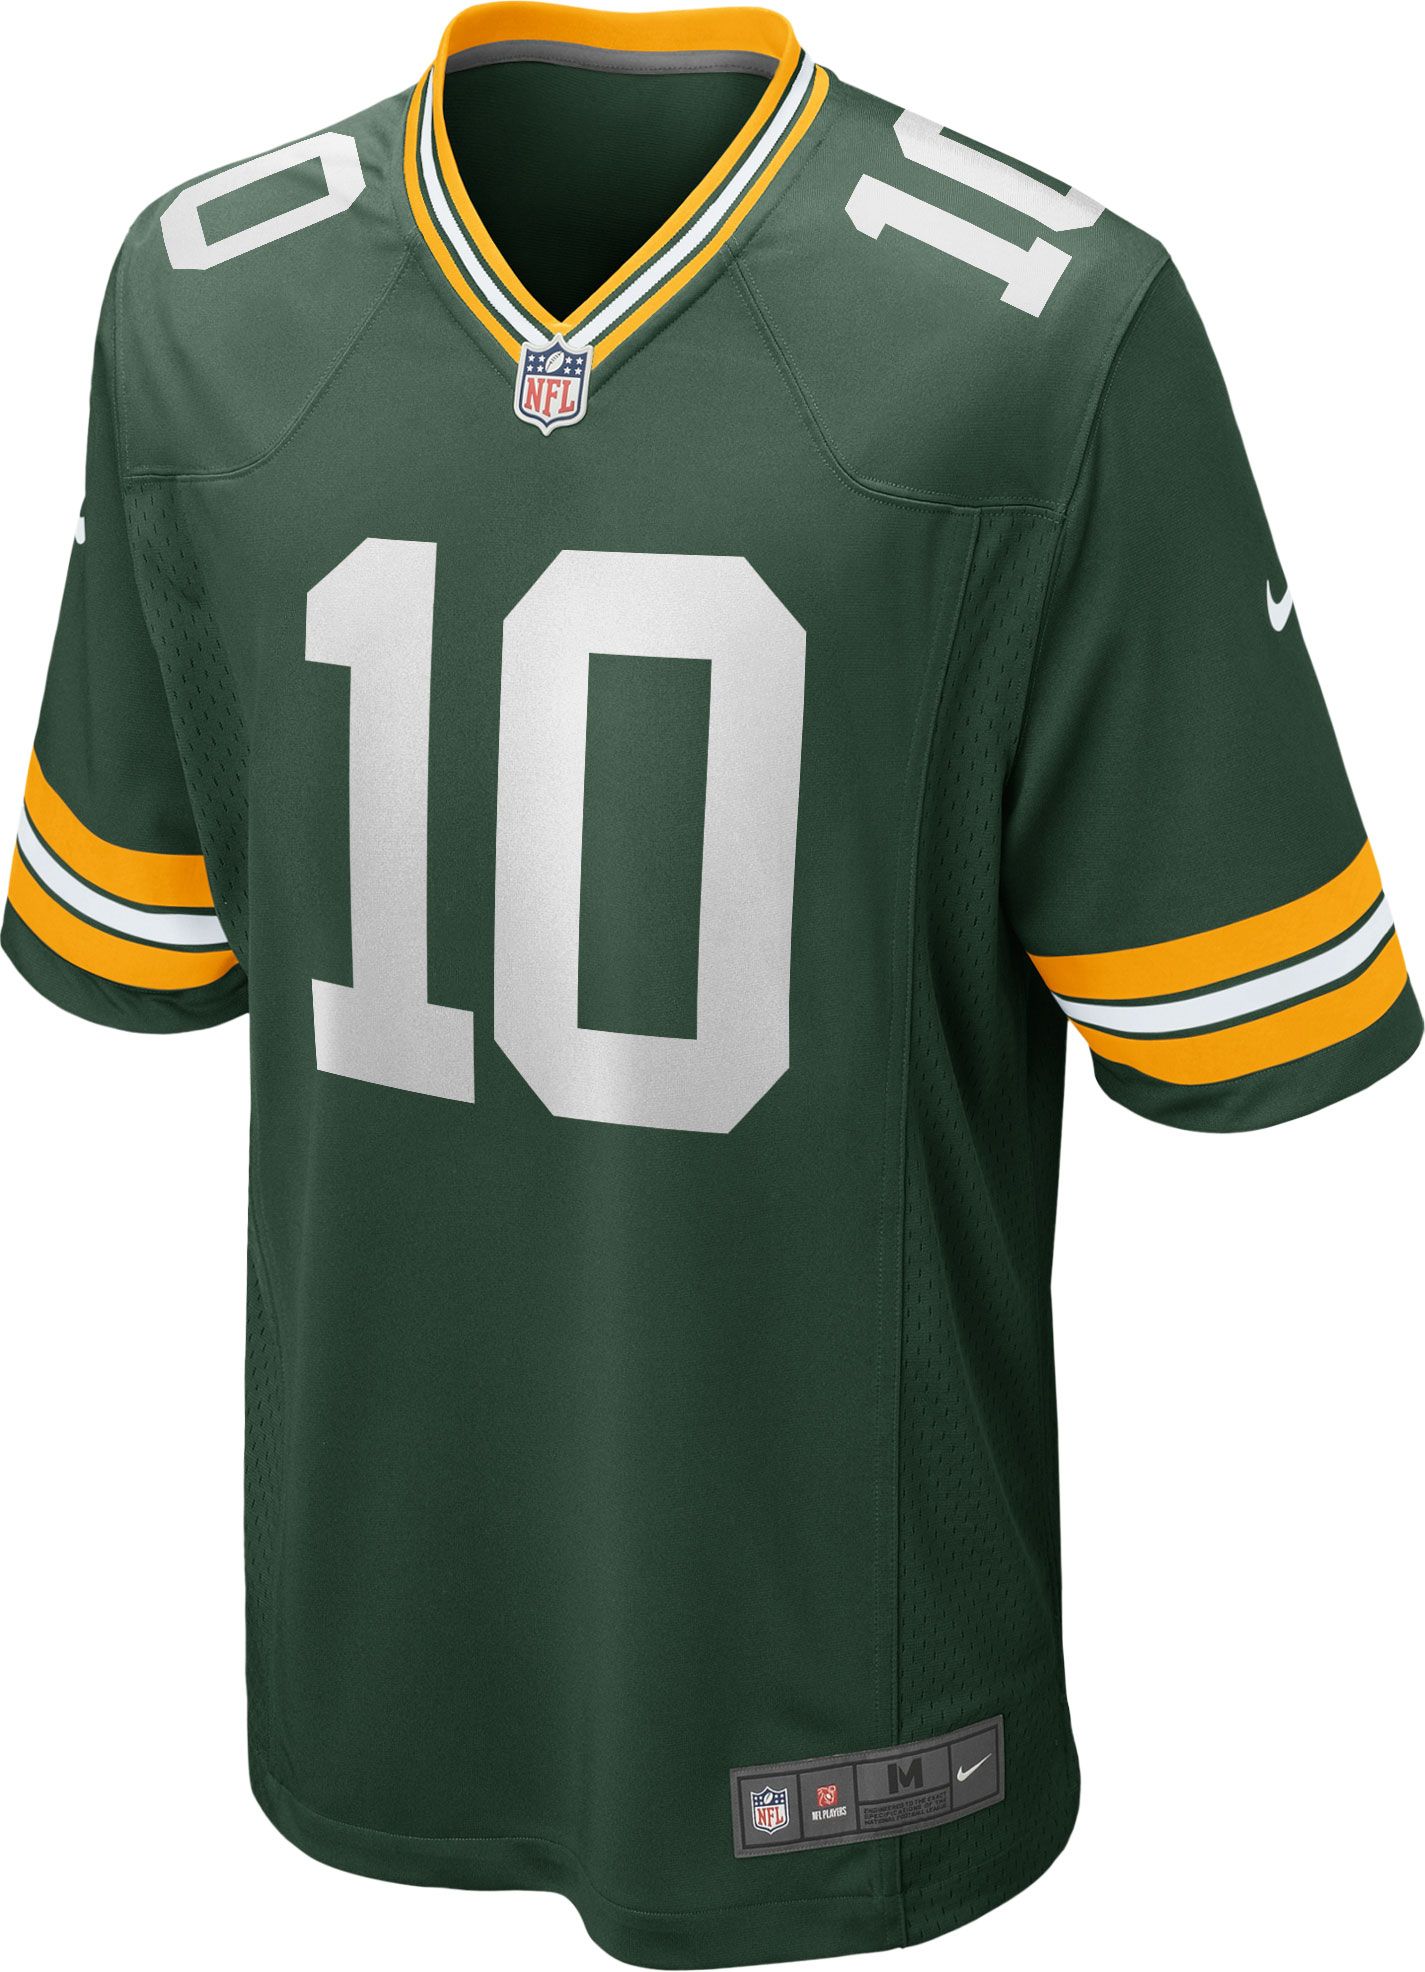 Packers Nike jersey